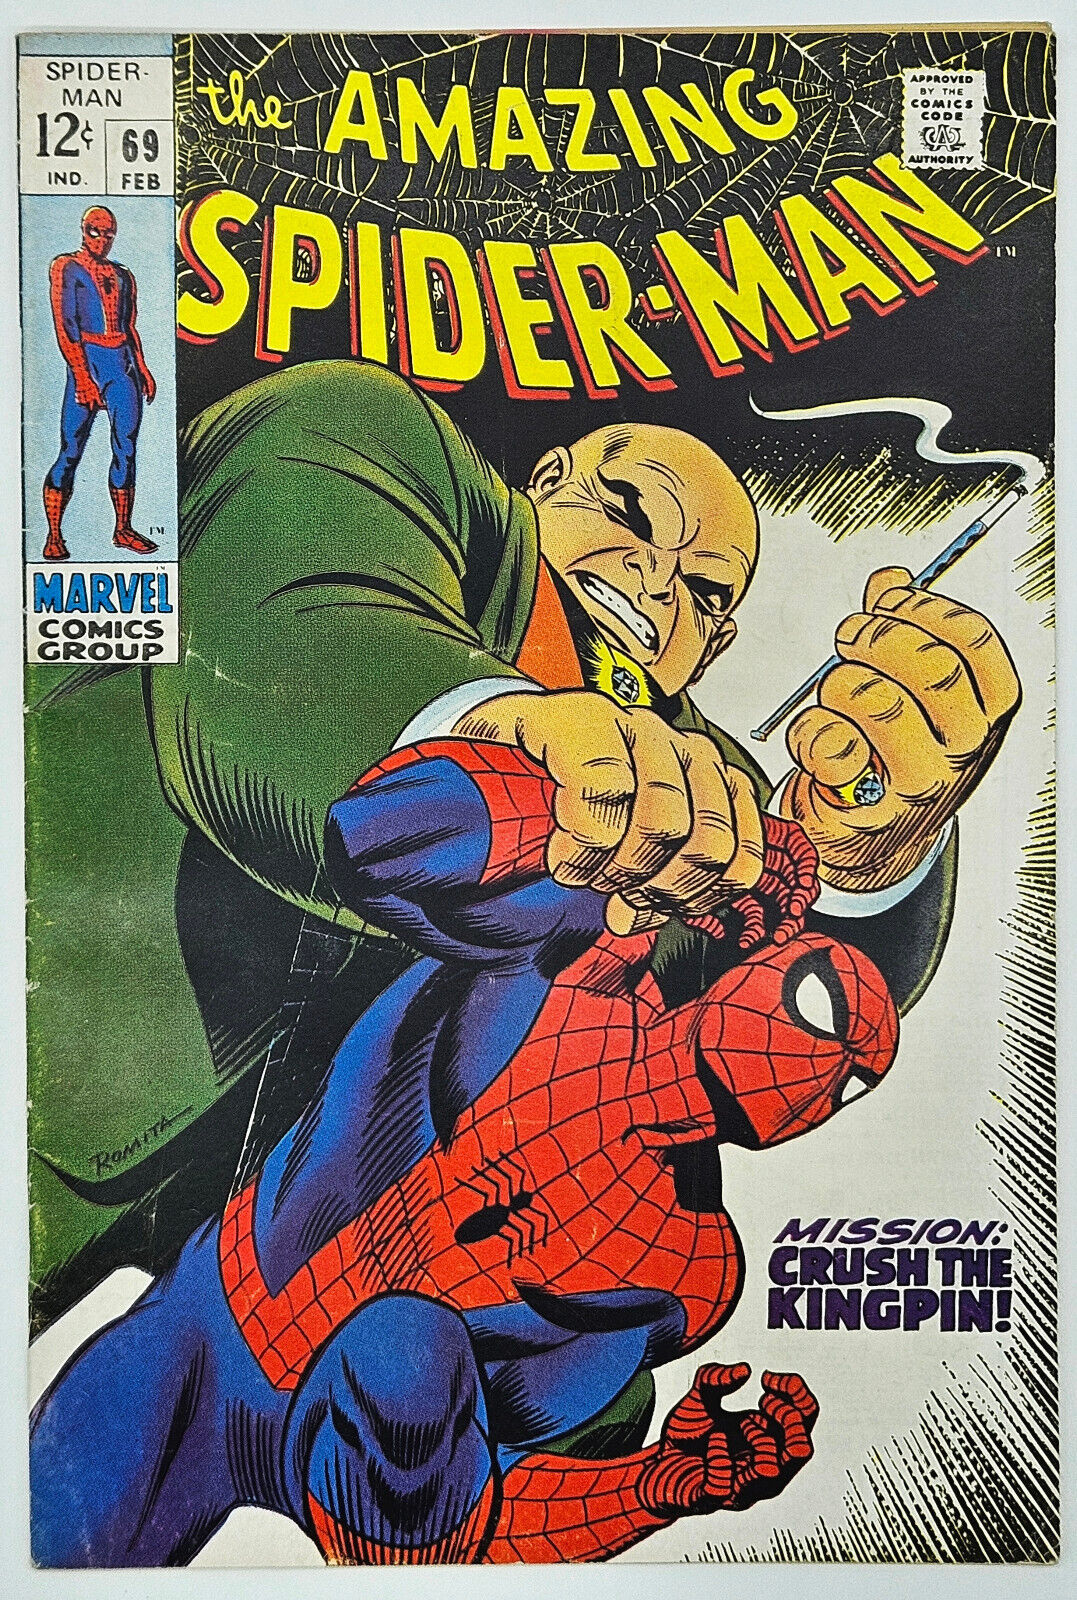 The Amazing Spider-Man #69 1969 6.0 FN; Spidey vs. Kingpin \